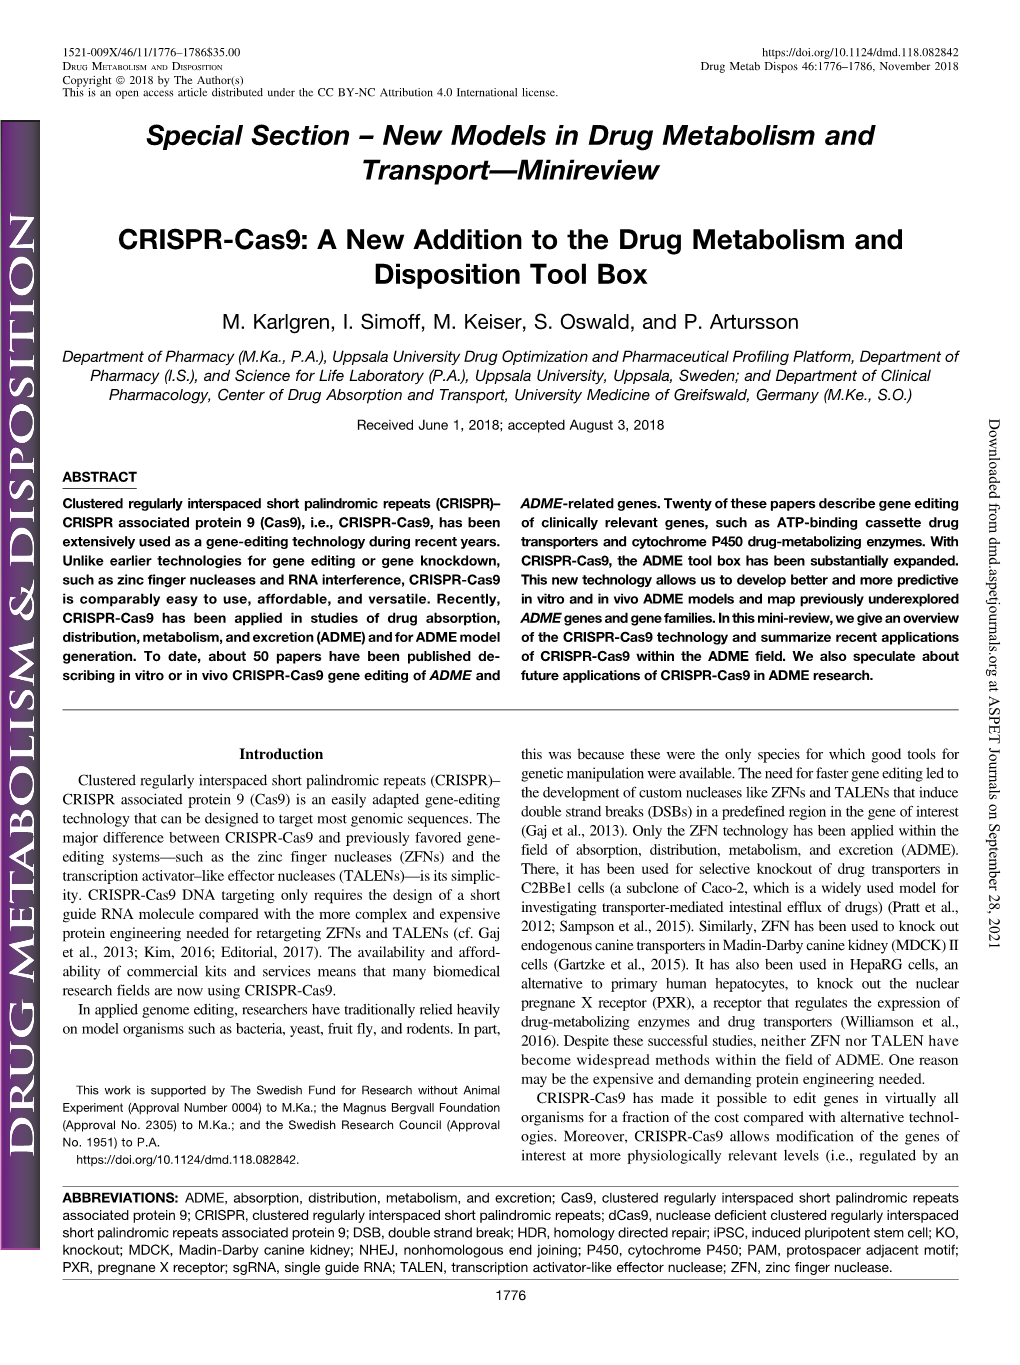 CRISPR-Cas9: a New Addition to the Drug Metabolism and Disposition Tool Box